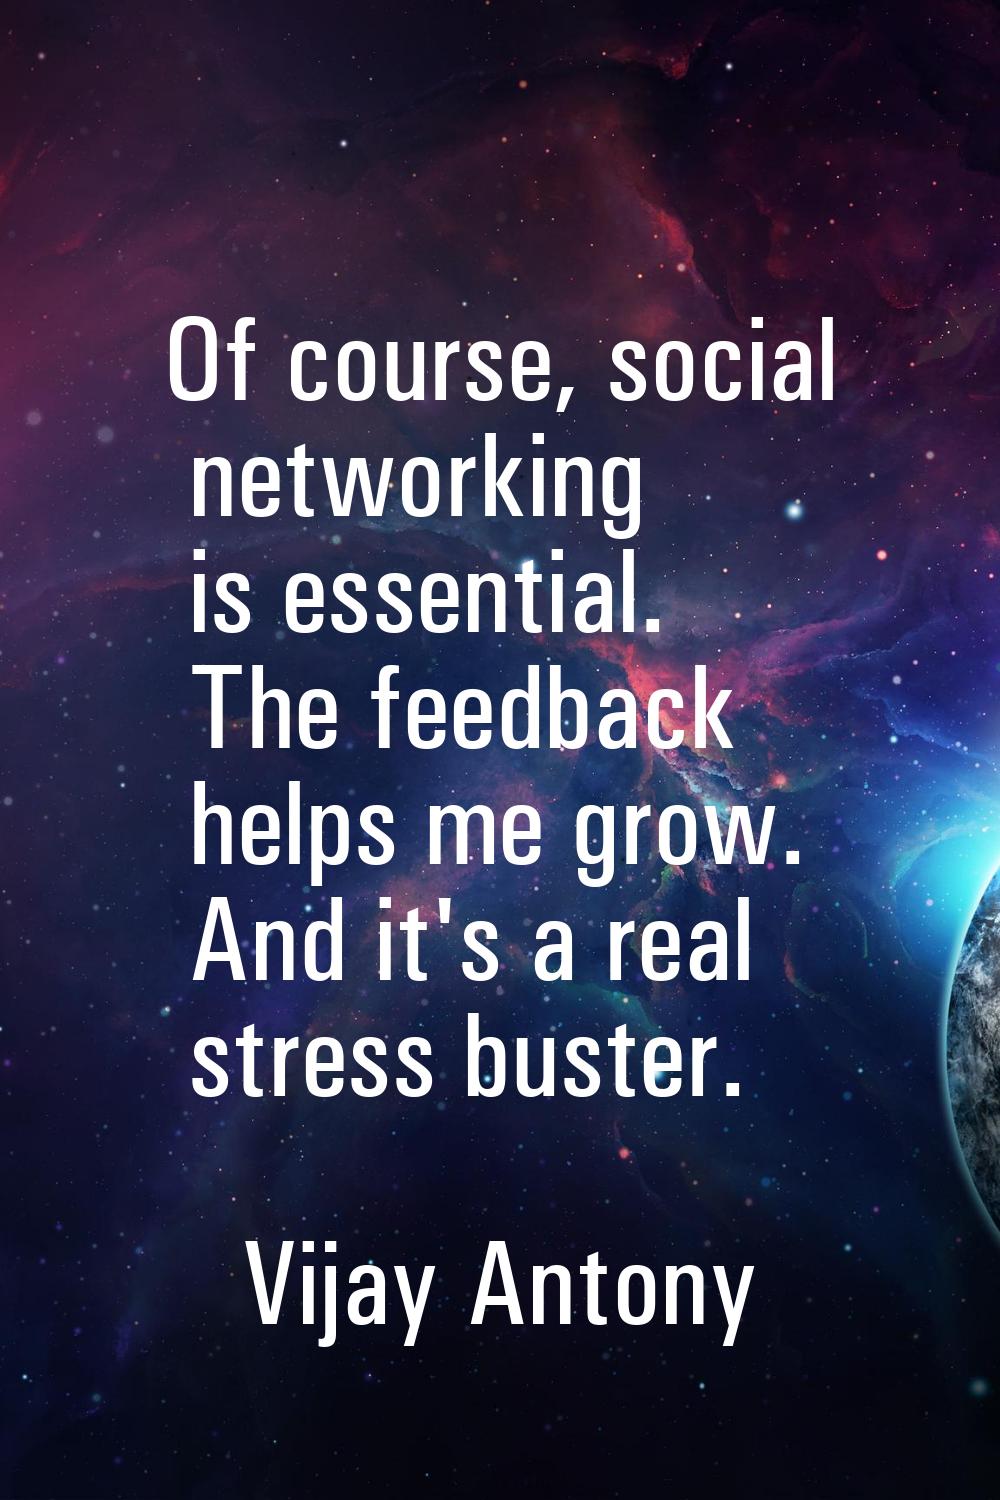 Of course, social networking is essential. The feedback helps me grow. And it's a real stress buste